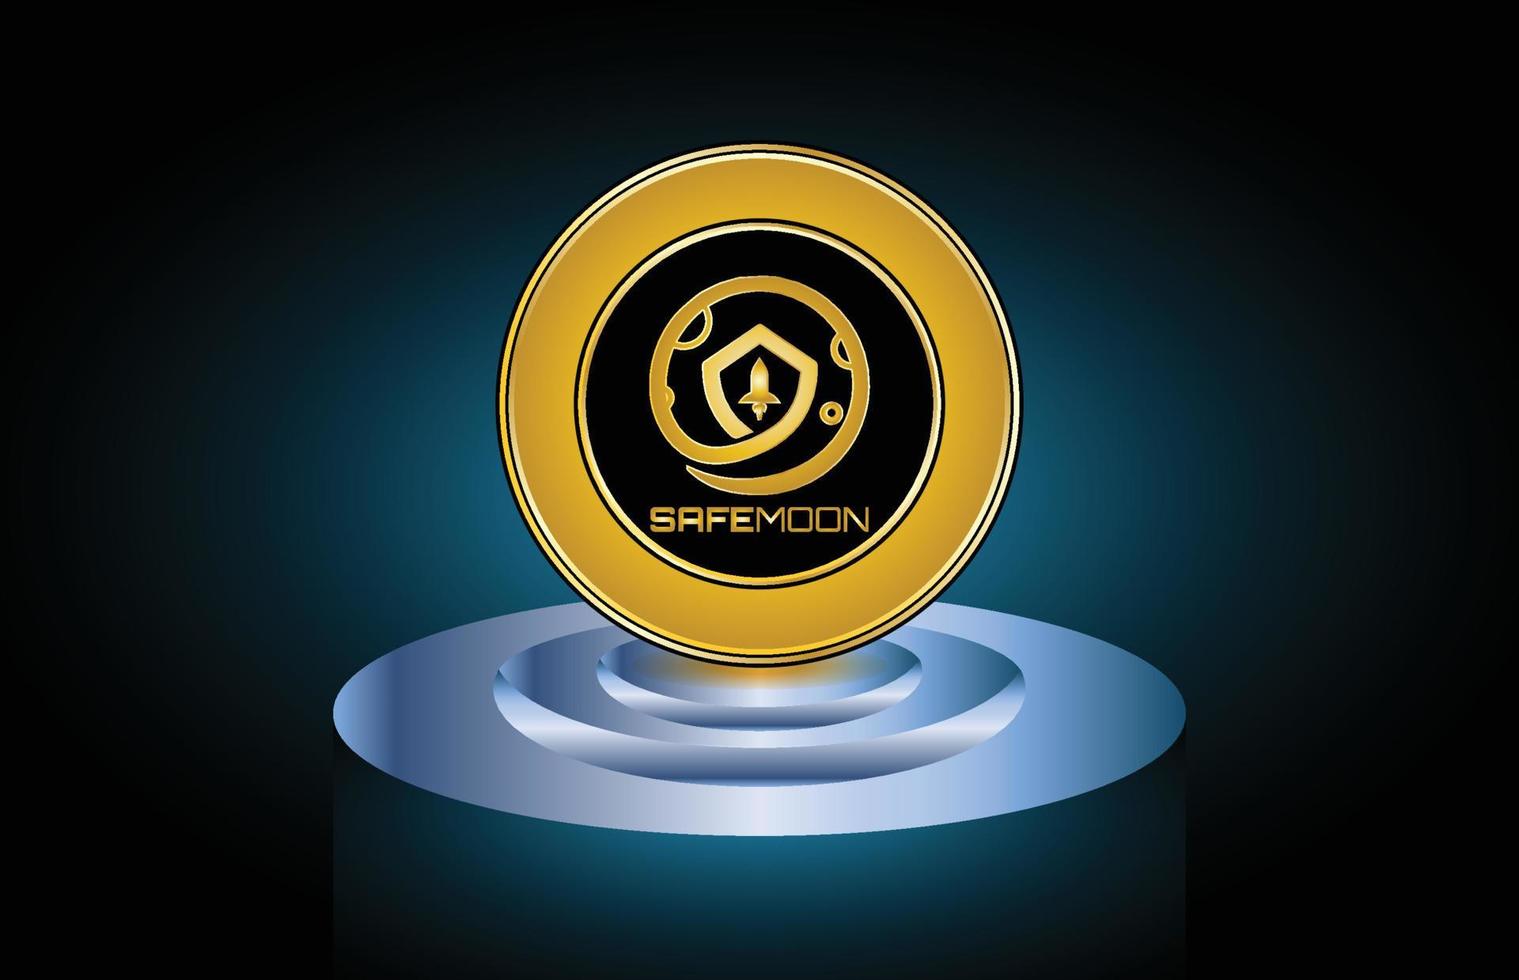 Safe moon coin crypto currency symbol on stage vector